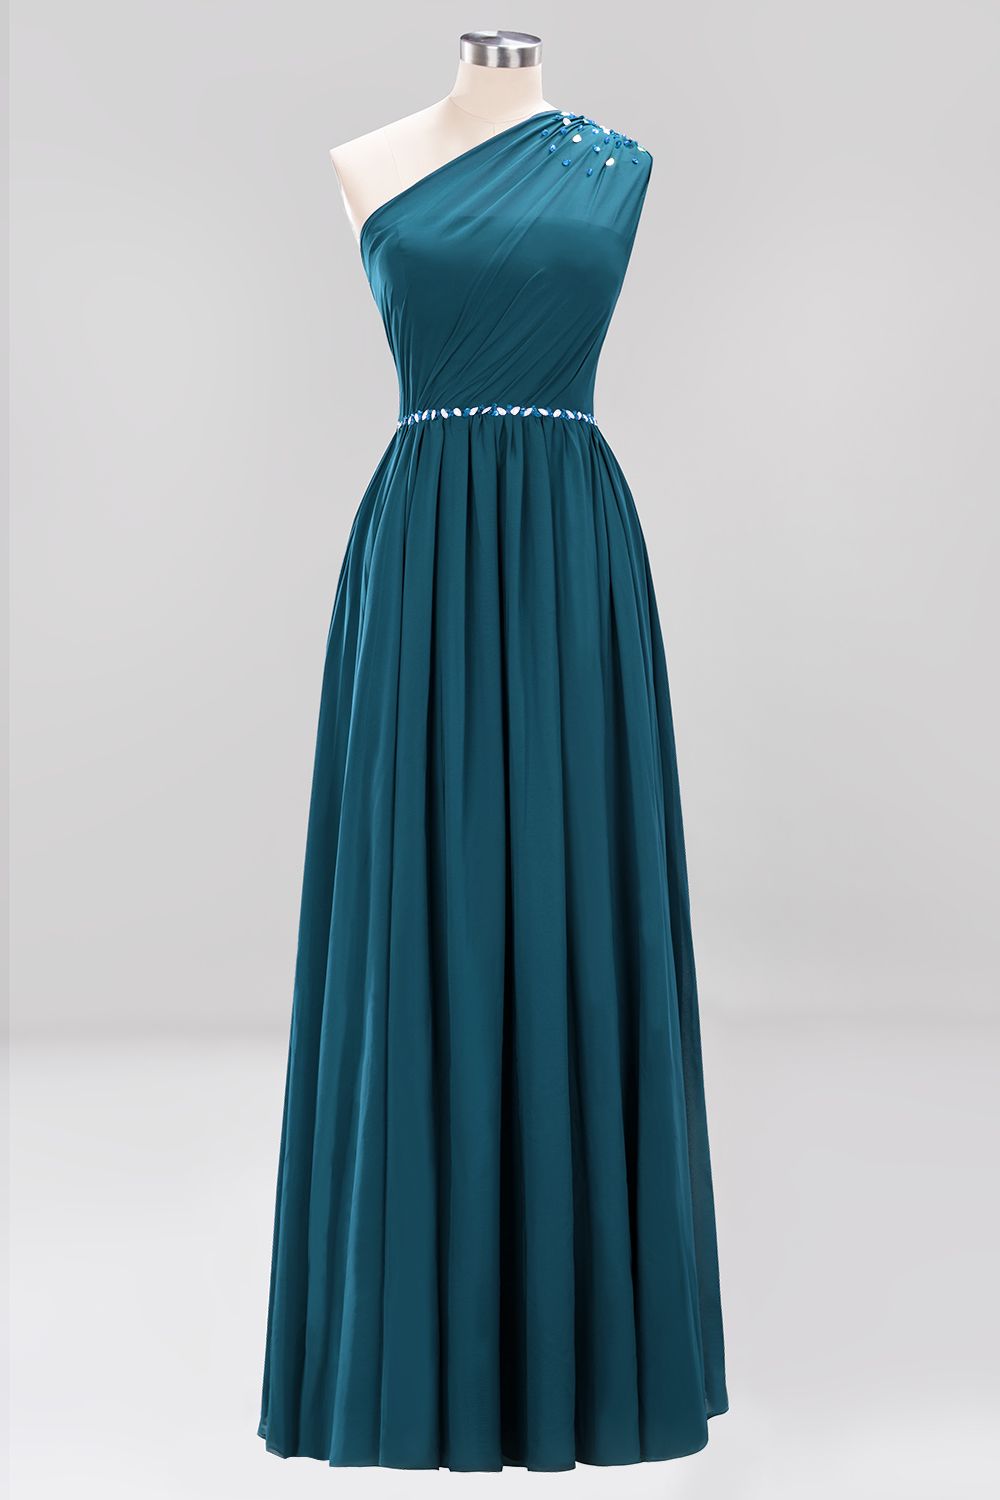 Modest One-shoulder Royal Blue Affordable Bridesmaid Dress with Beadings